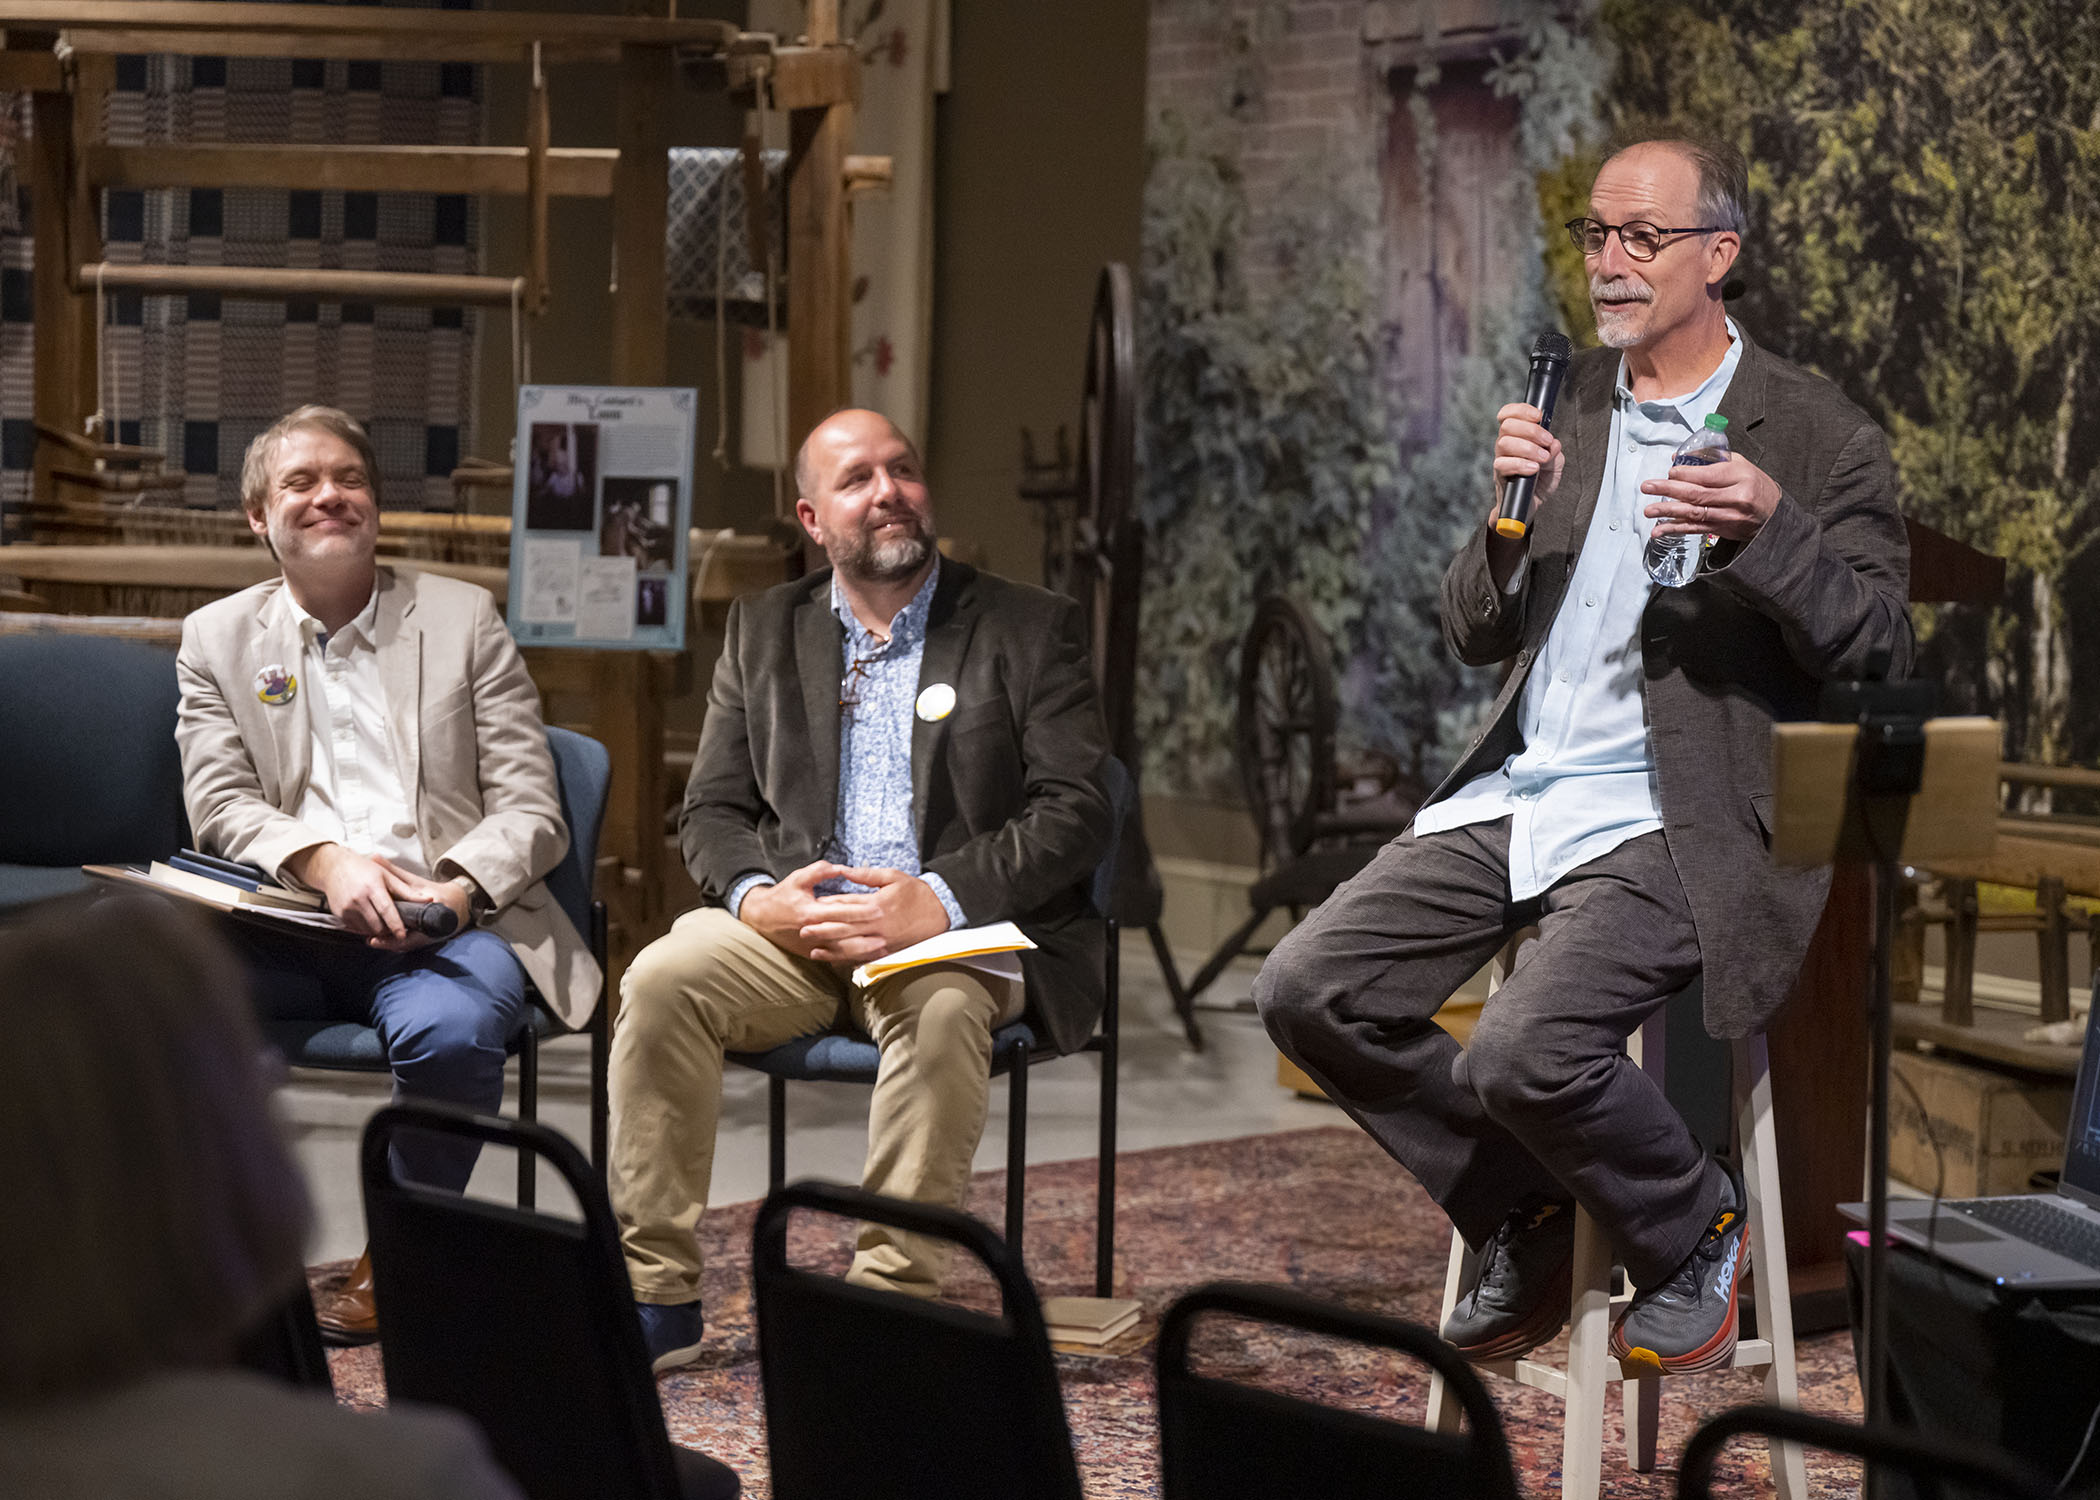 Keynote speaker Daniel Wallace joins a roundtable discussion with Dr. Jesse Graves and Dr. Scott Honeycutt to discuss his new memoir, This Isn't Going to End Well, and the legacy of William Nealy.  
